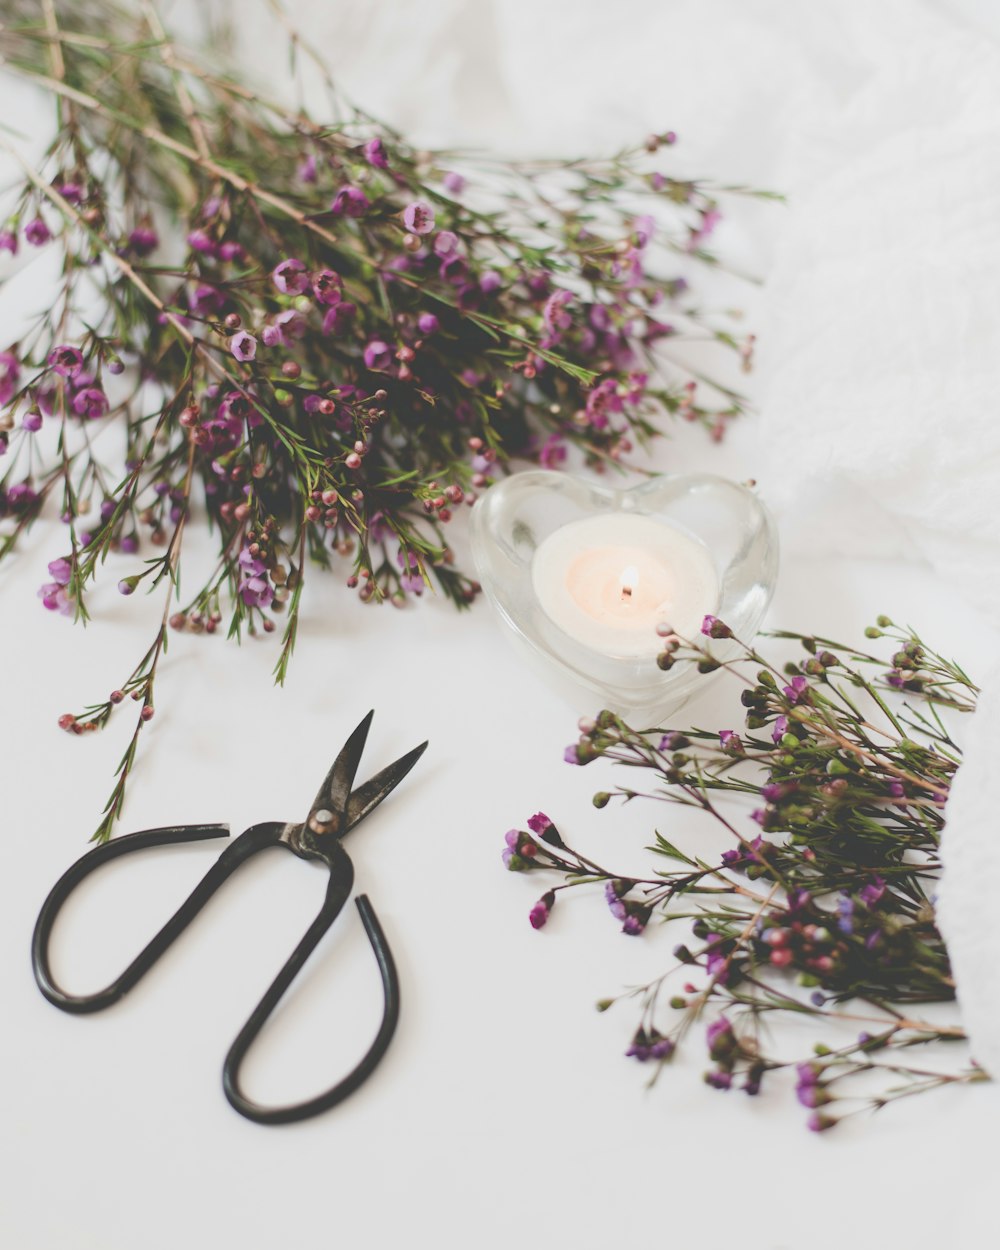 a pair of scissors sitting next to a bunch of flowers